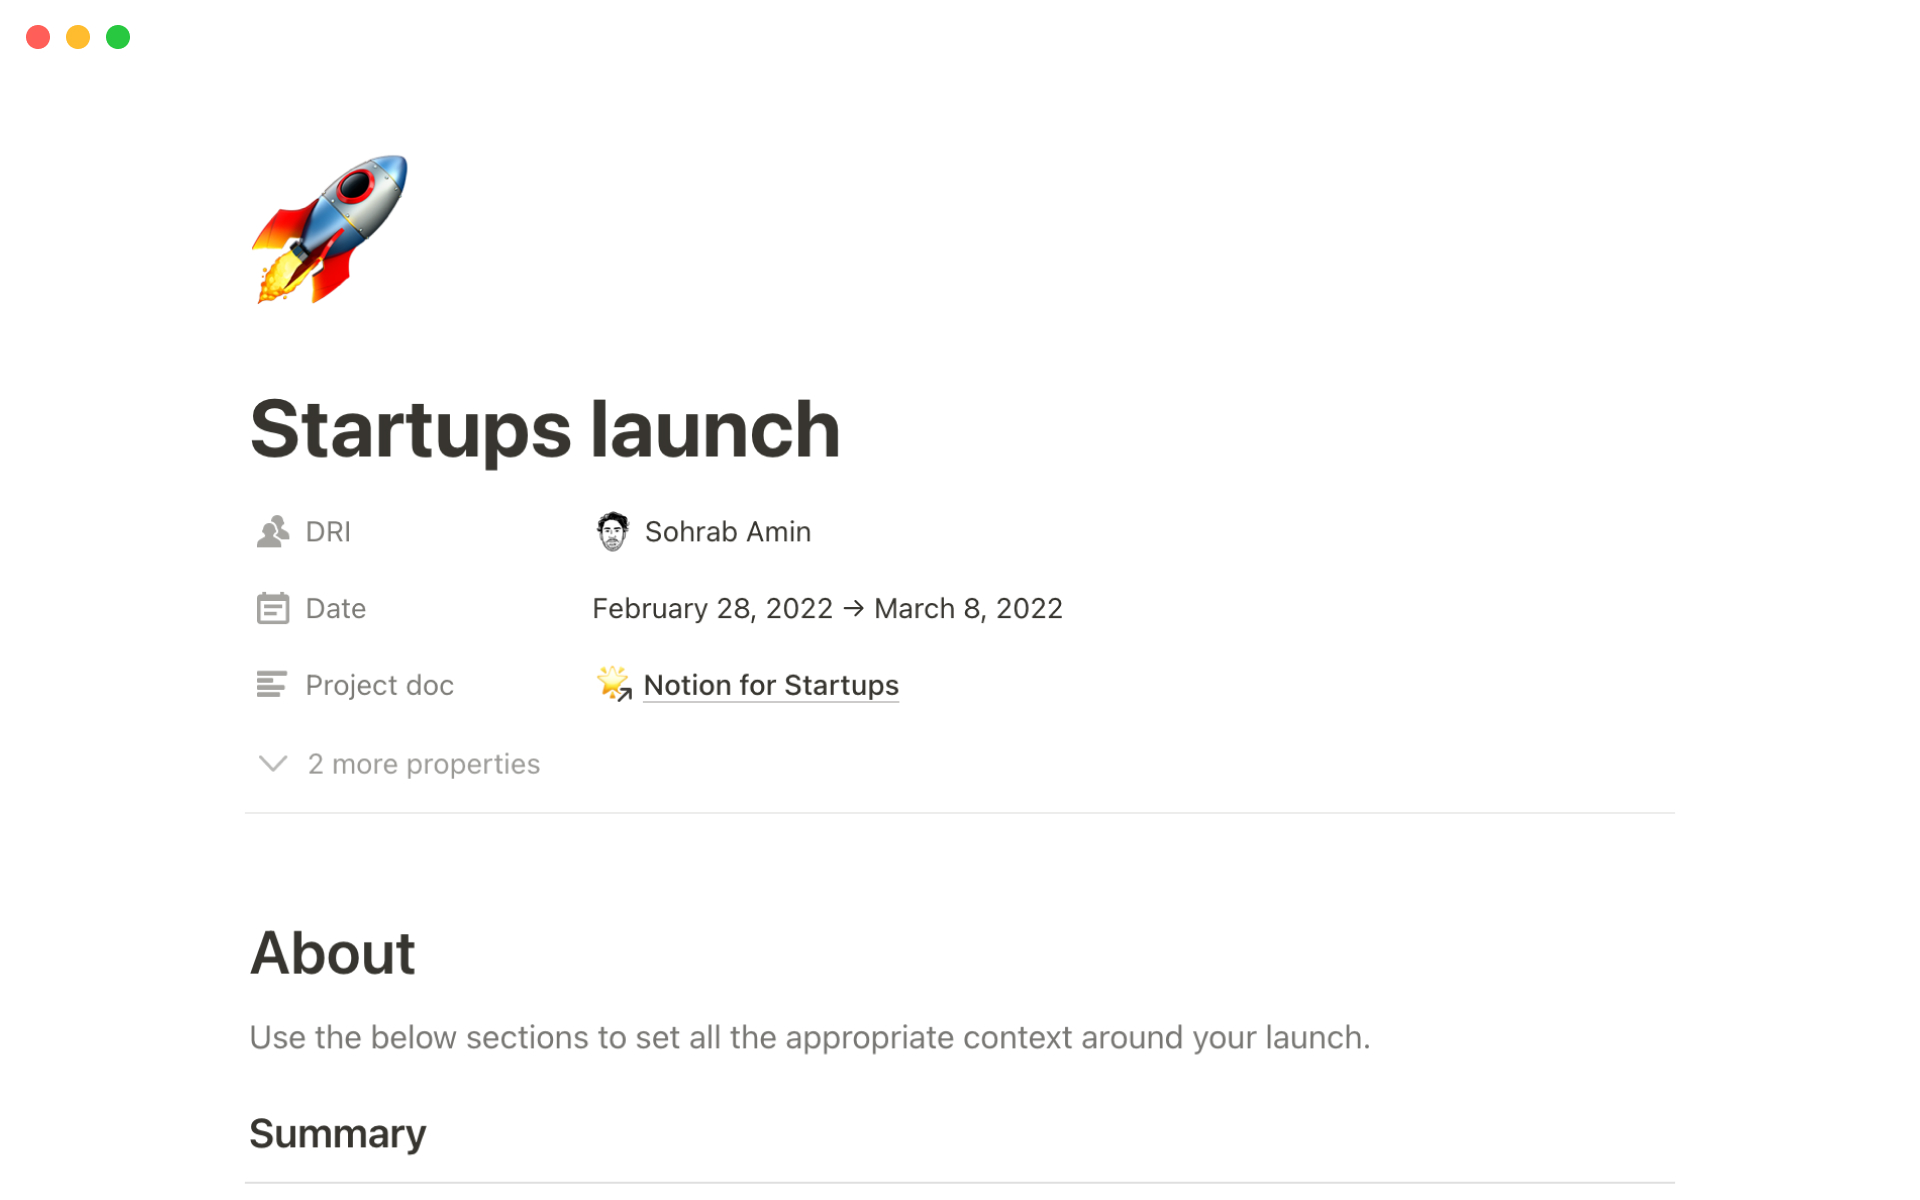 Keep track of your launches and align cross-functional teams at every stage of bringing a product to users.